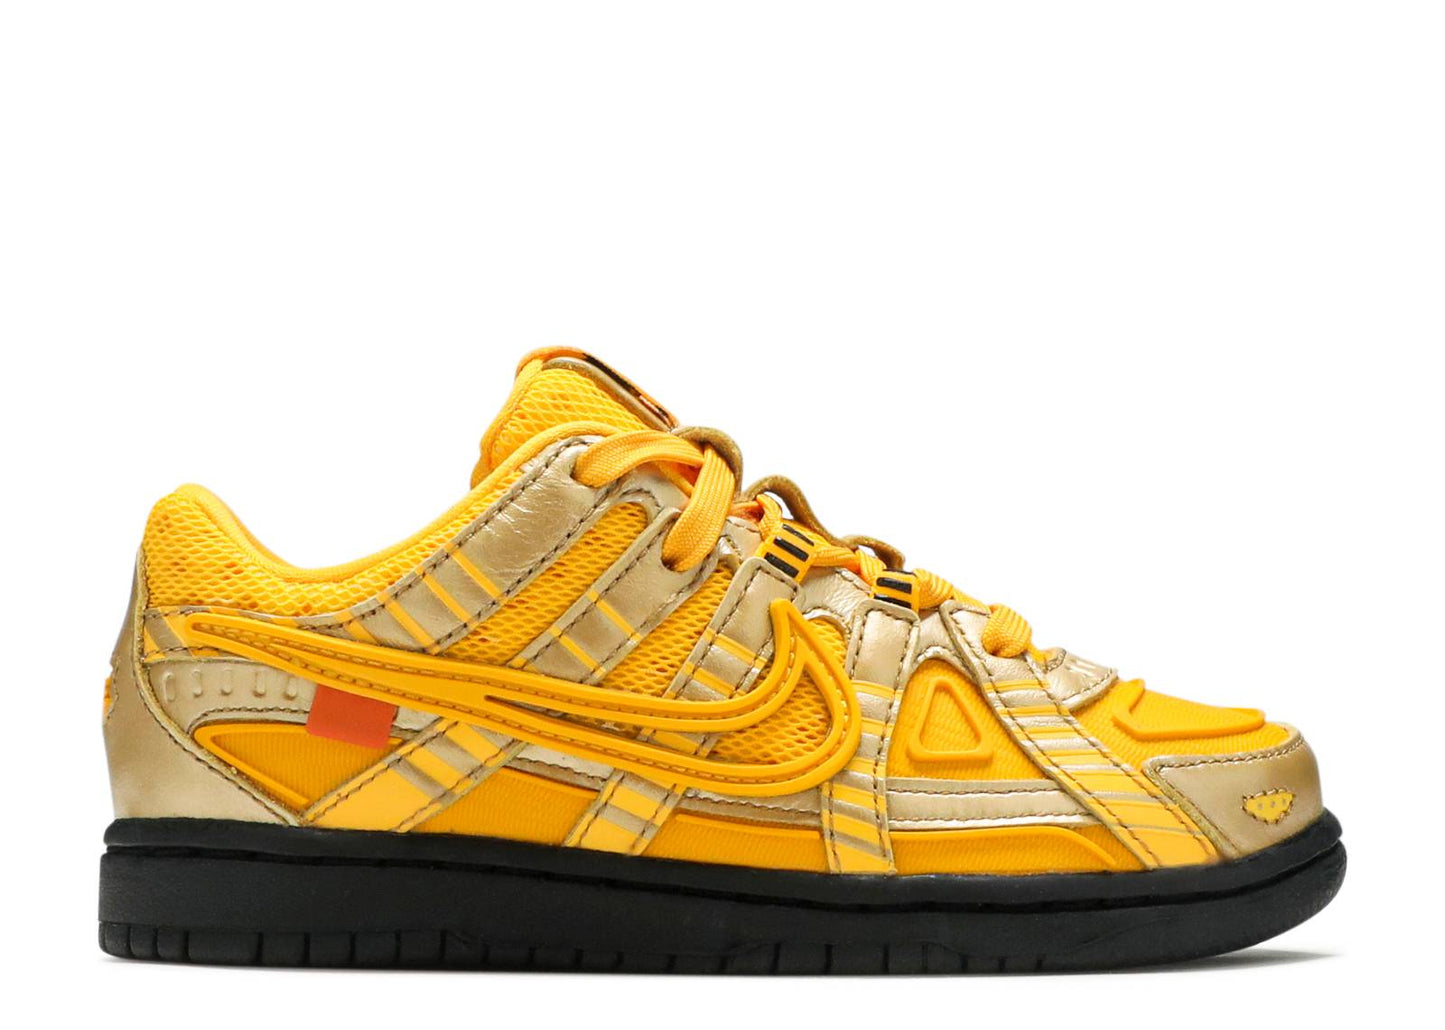 Off White x Nike Air Rubber Dunk PS "University Gold"